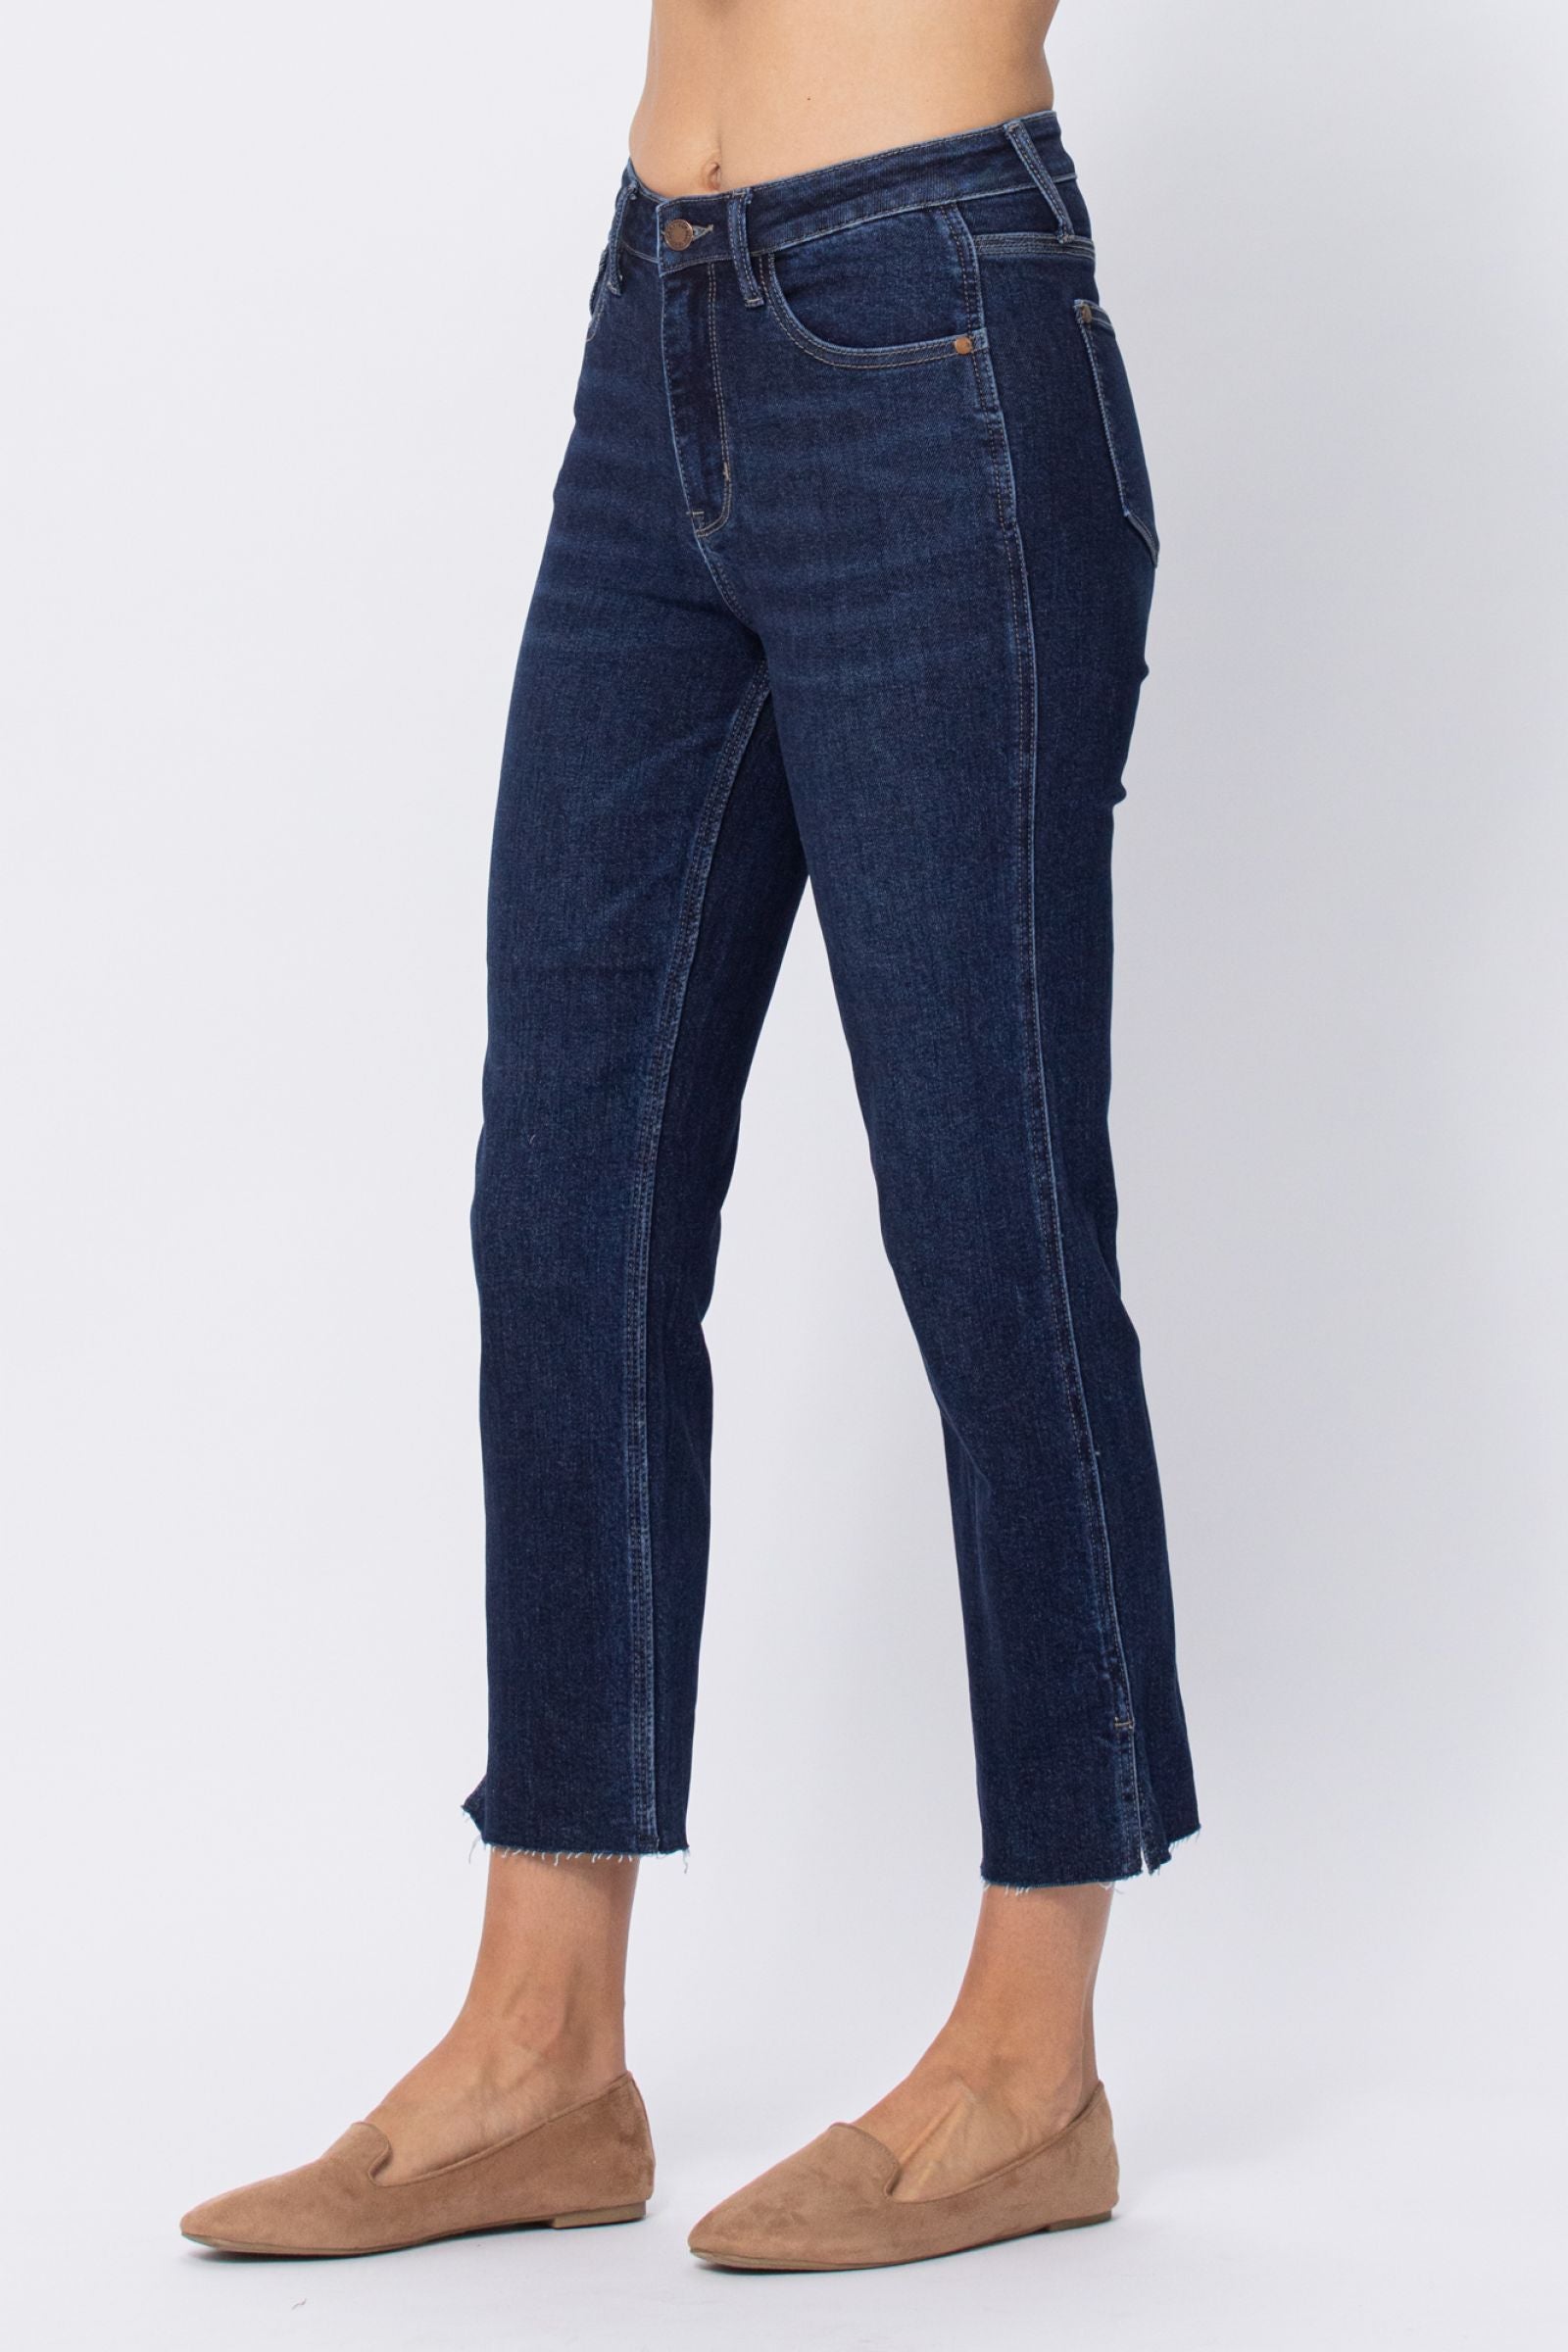 Judy Blue High Waisted Double Cuff Dark Wash Joggers - Whiskey Skies